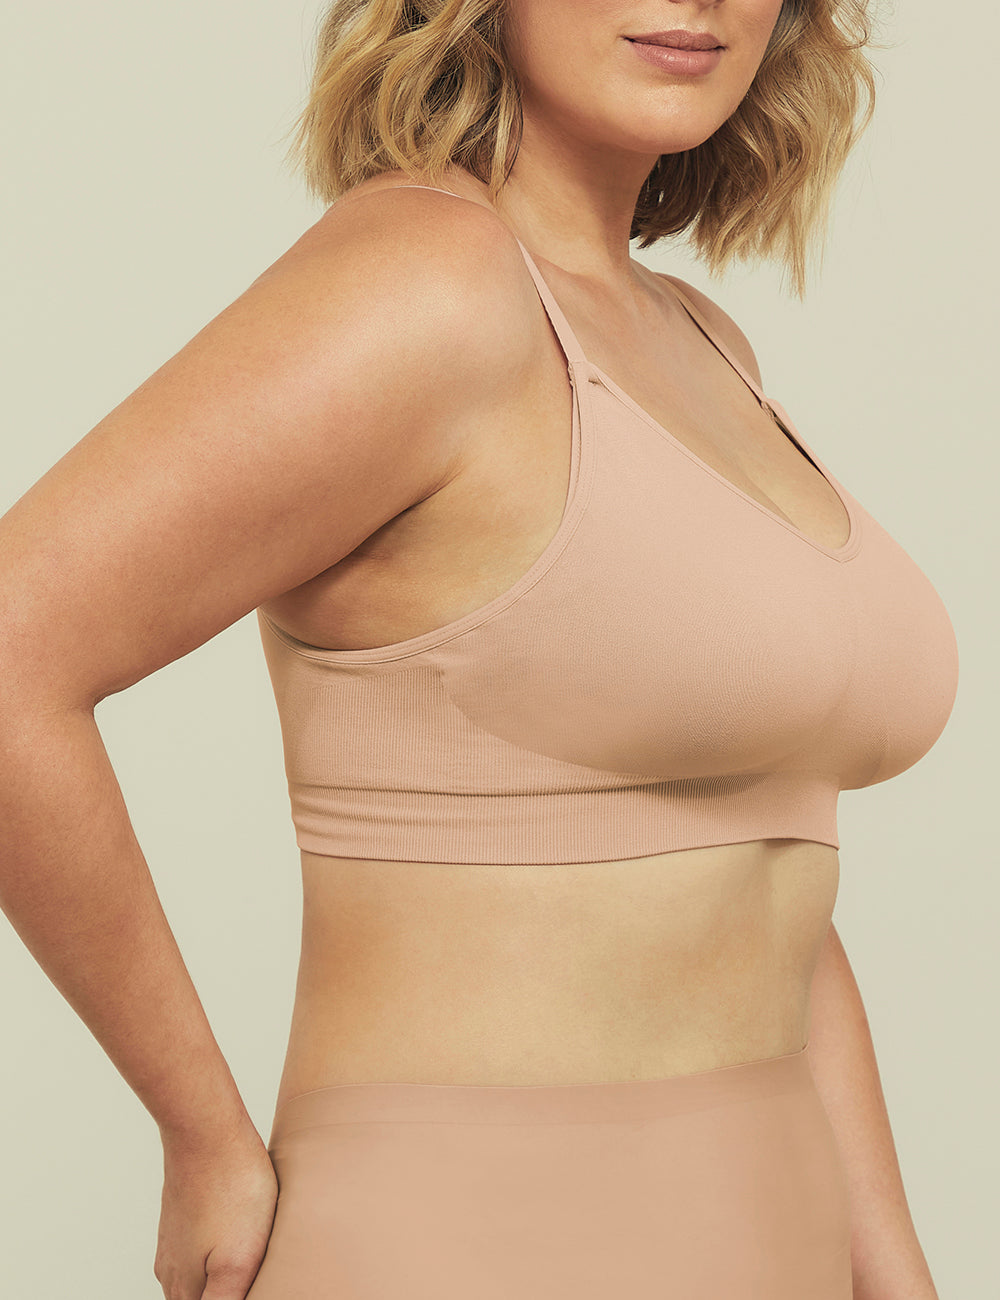 Curvesque Support Wirefree Bra